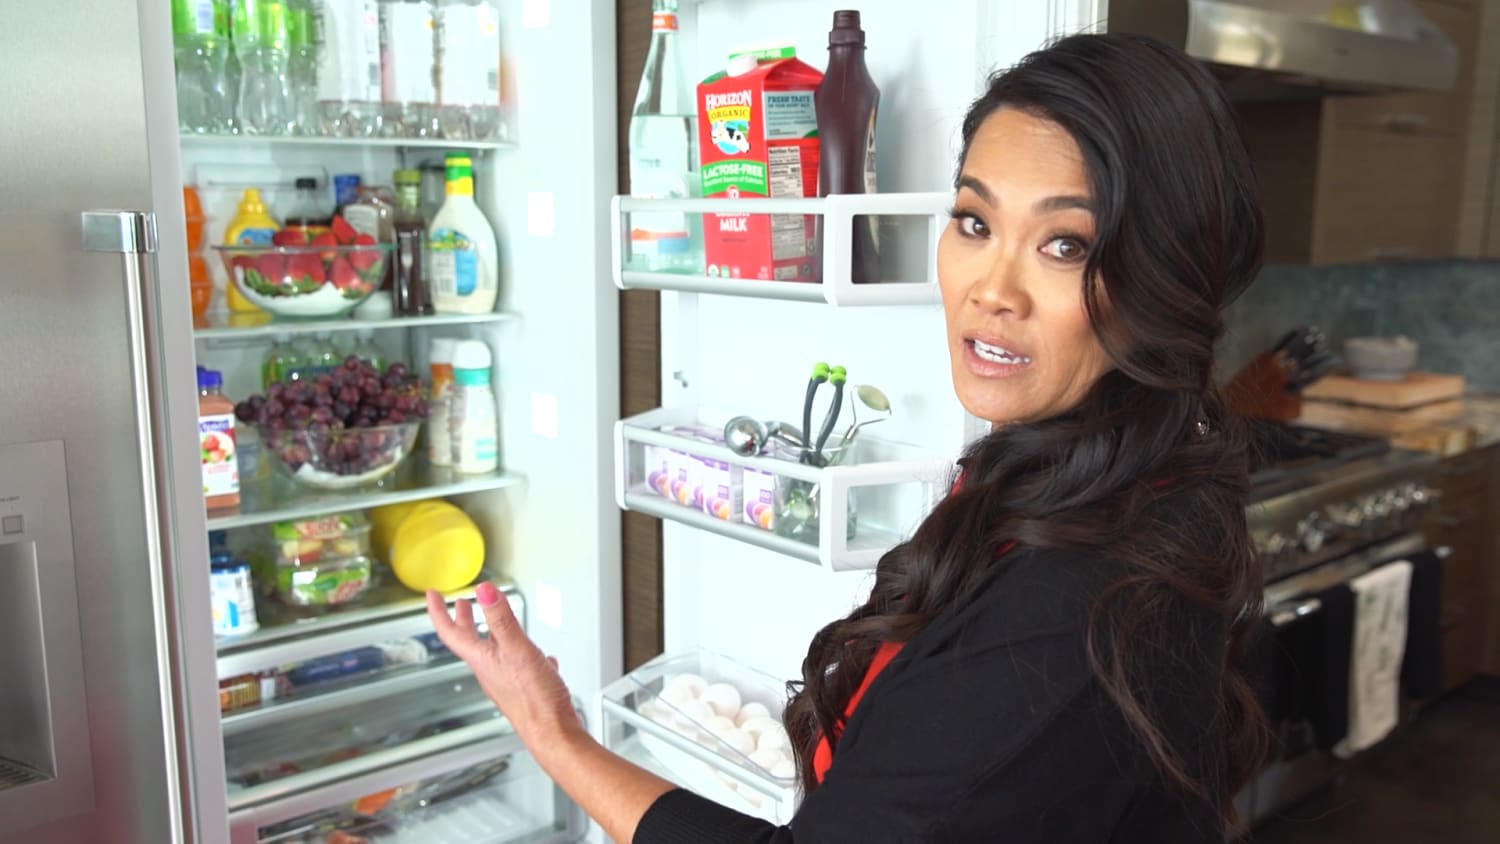 Doctor Pimple Popper, Sandra Lee, takes us inside her gorgeous kitchen